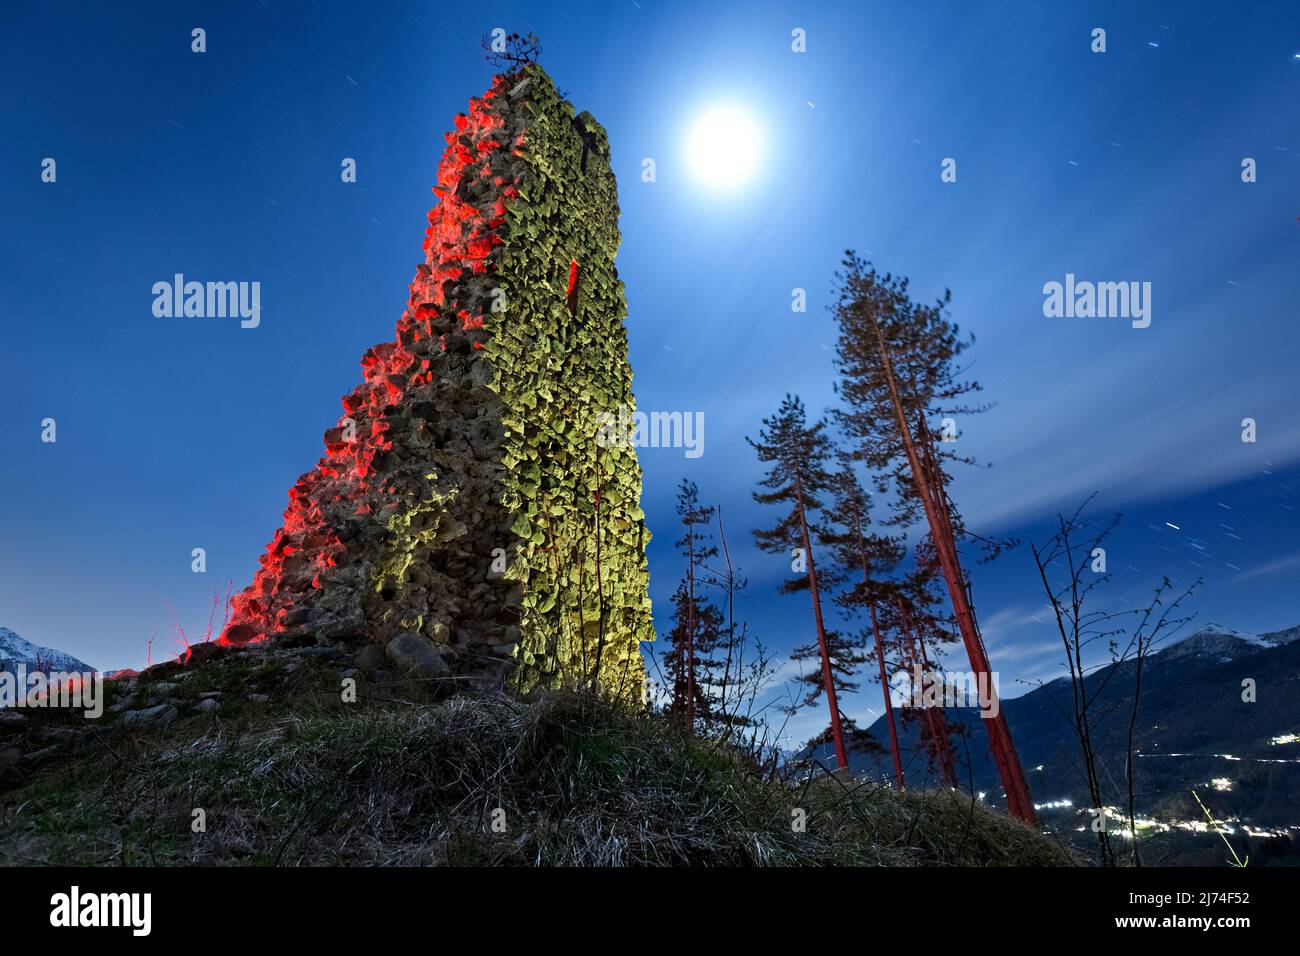 Ghostly night at the medieval ruins of San Pietro castle in Torcegno. Valsugana, Trento province, Trentino Alto-Adige, Italy, Europe. Stock Photo